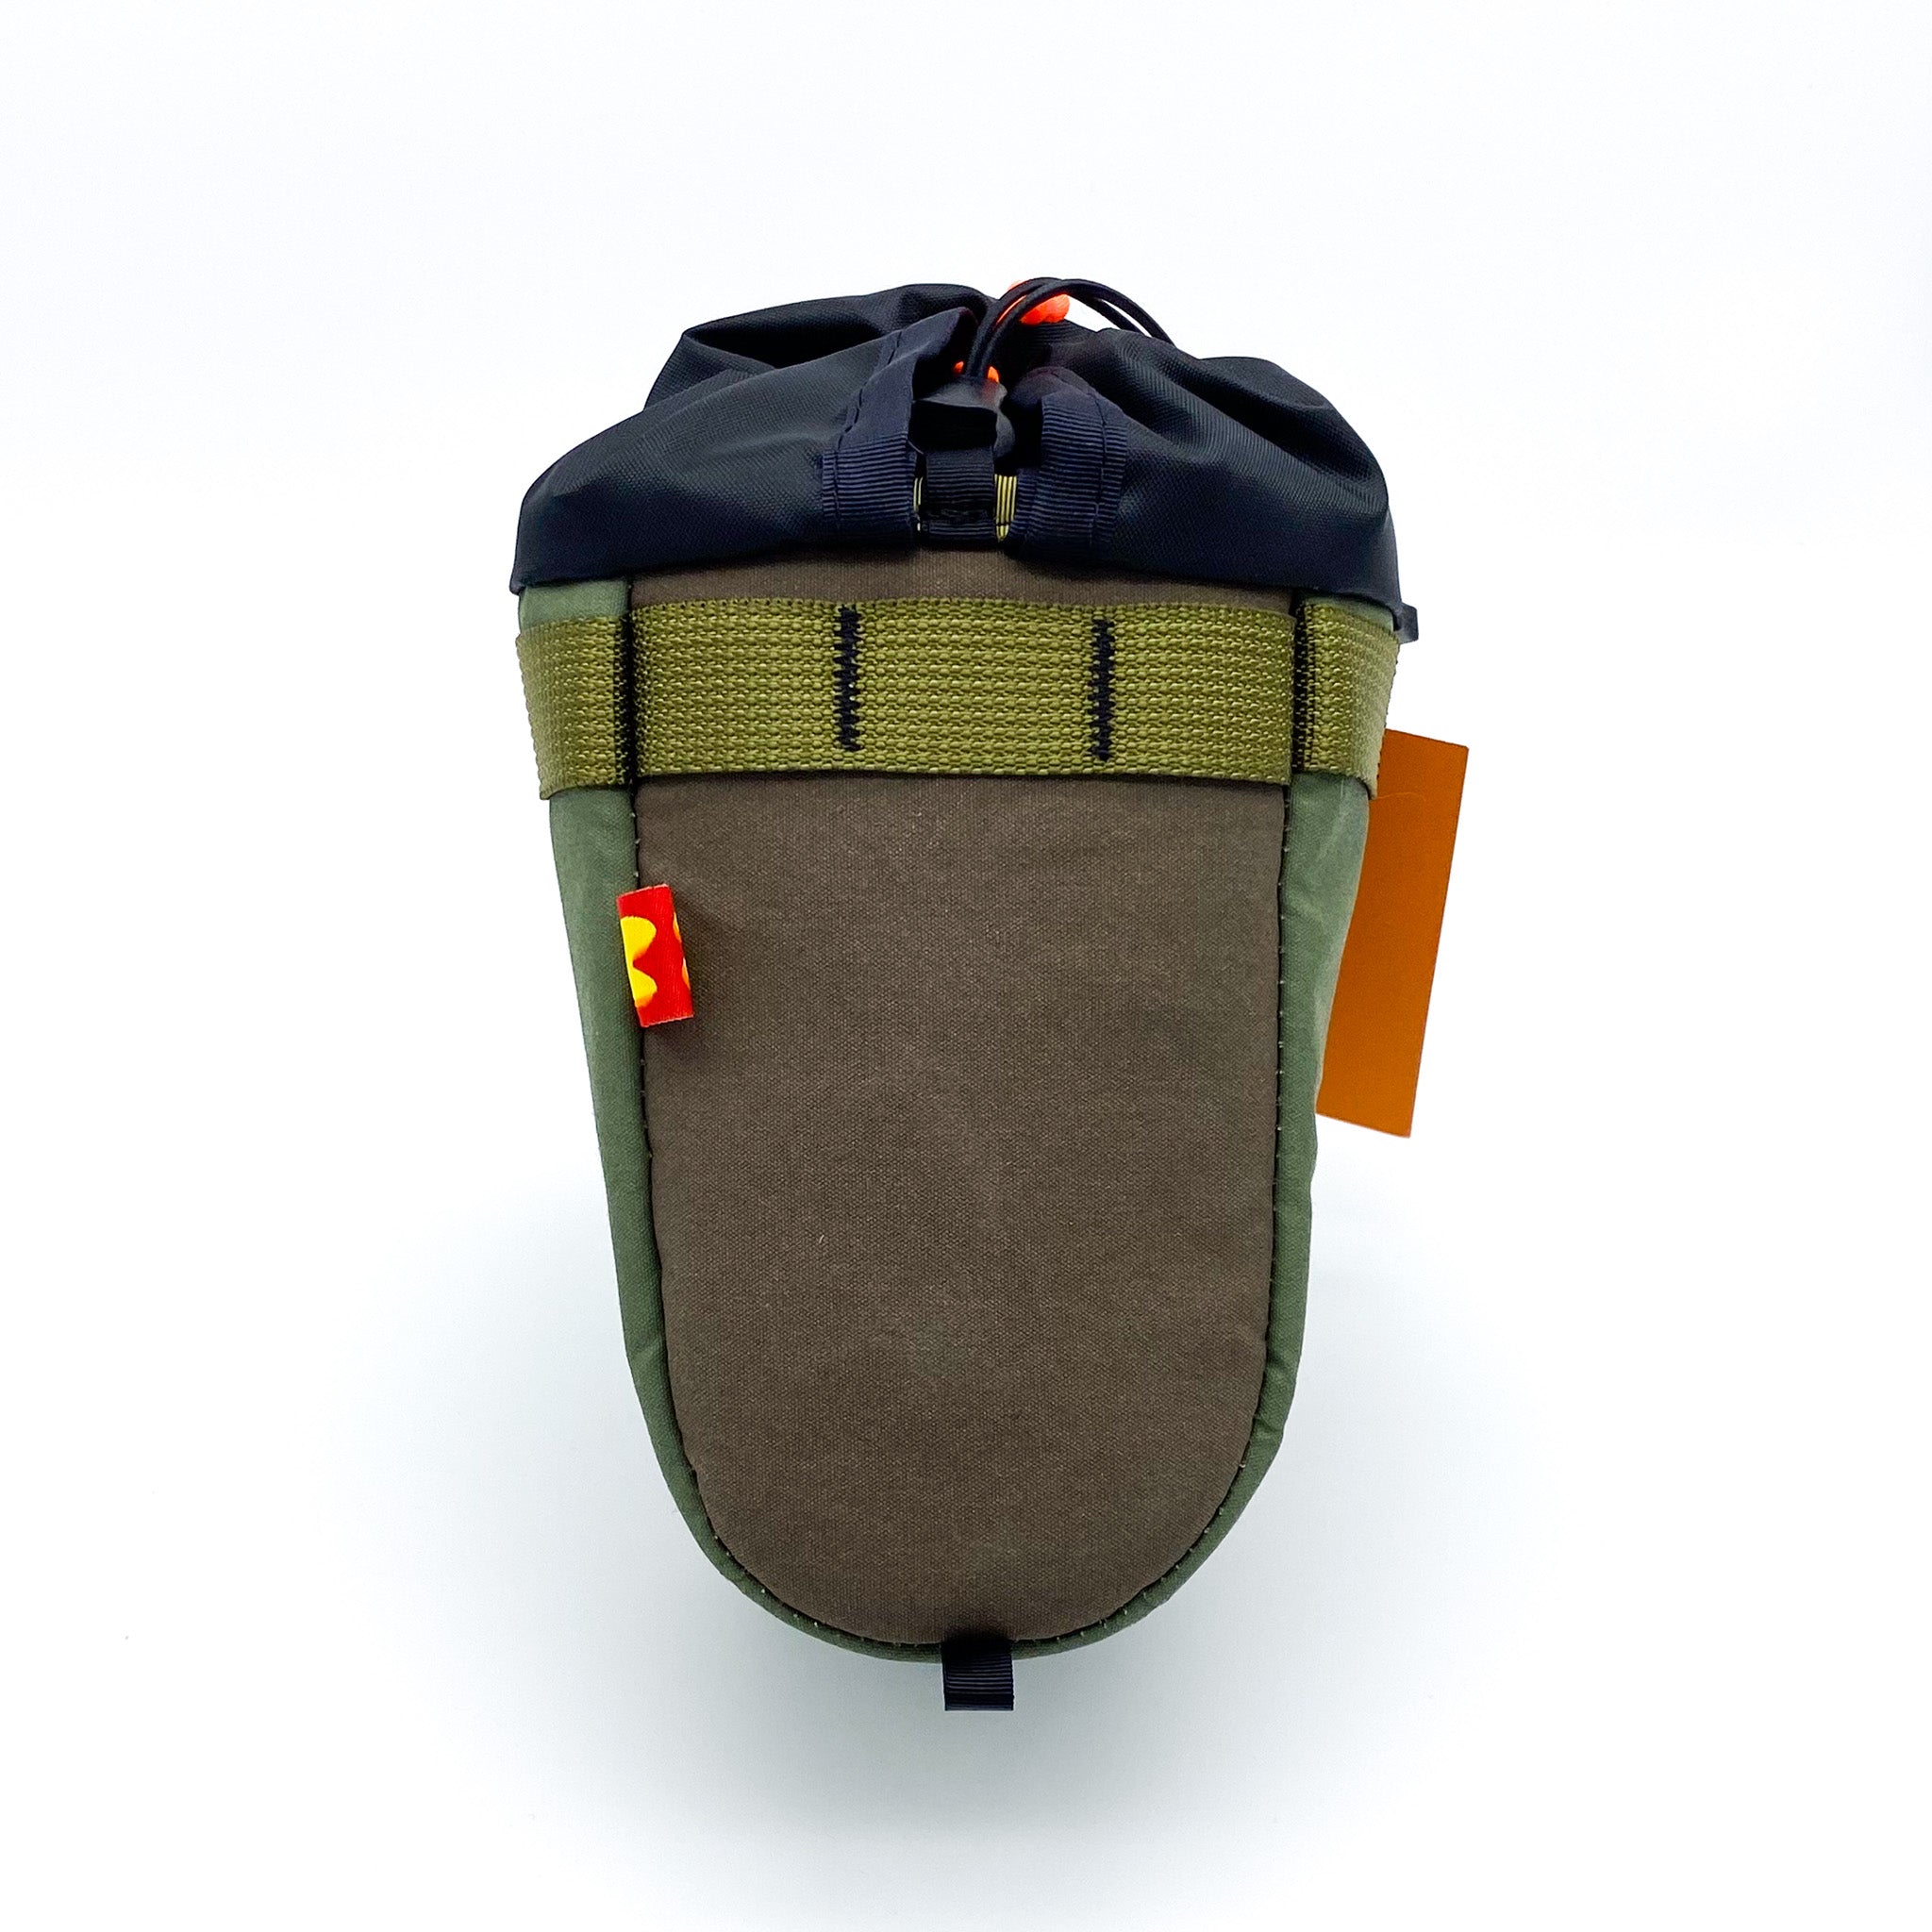 Hungry 'The Muncher v2.0' Feed Bag - Khaki/Brown Canvas